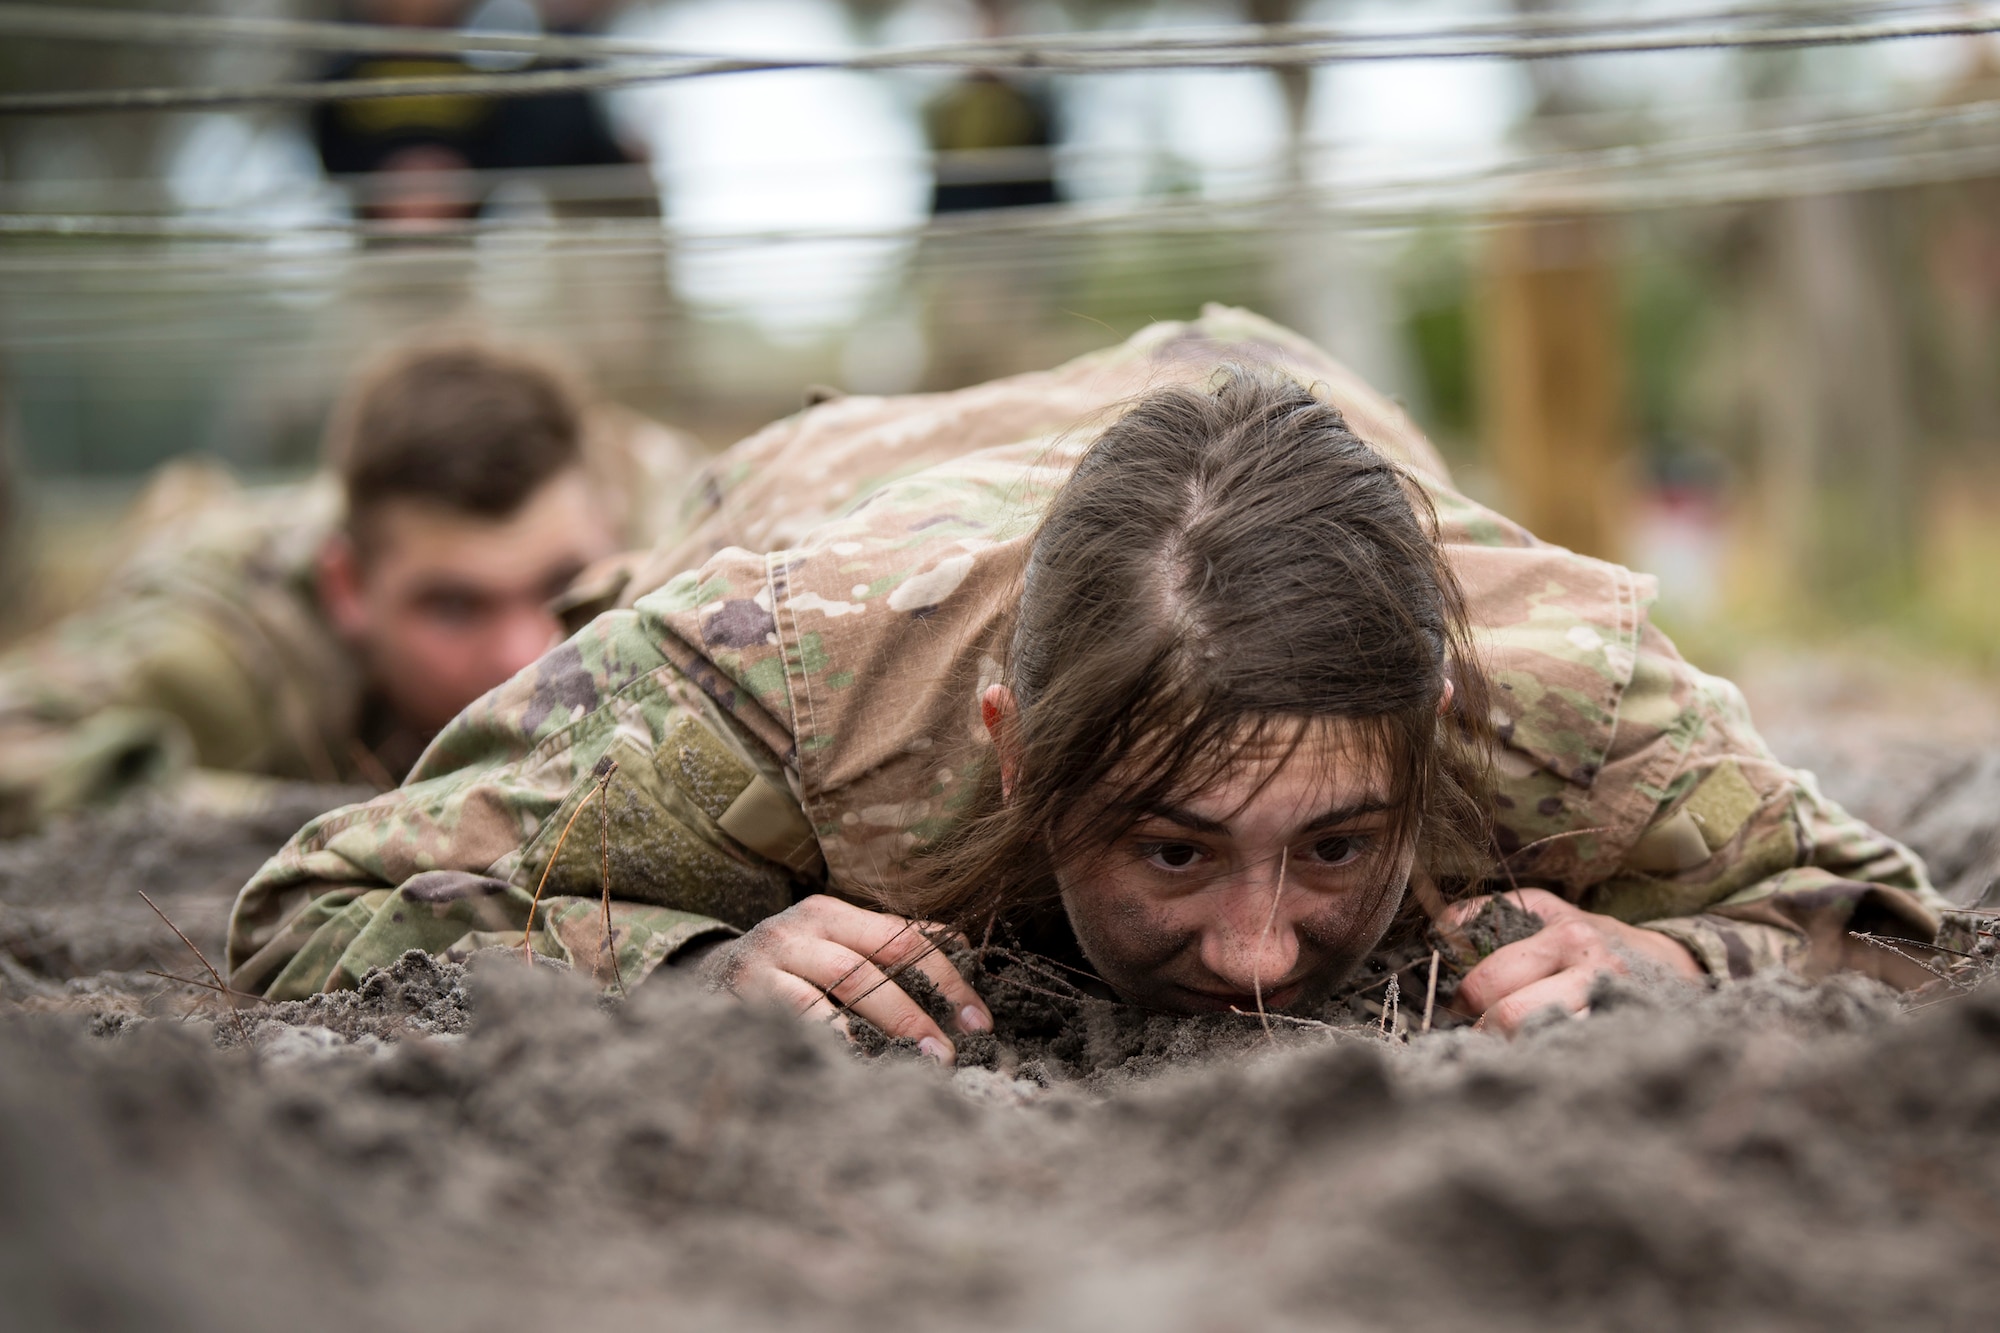 Airman First Class Madison Ruiz, 823 Base Defense Squadron security forces member, low crawls through an obstacle during an Army Air Assault Assessment (AAA), Jan. 30, 2019, at Camp Blanding, Fla. The AAA is designed to determine Airmen’s physical and mental readiness before being selected to attend Army Air Assault school. (U.S. Air Force photo by Airman First Class Eugene Oliver)